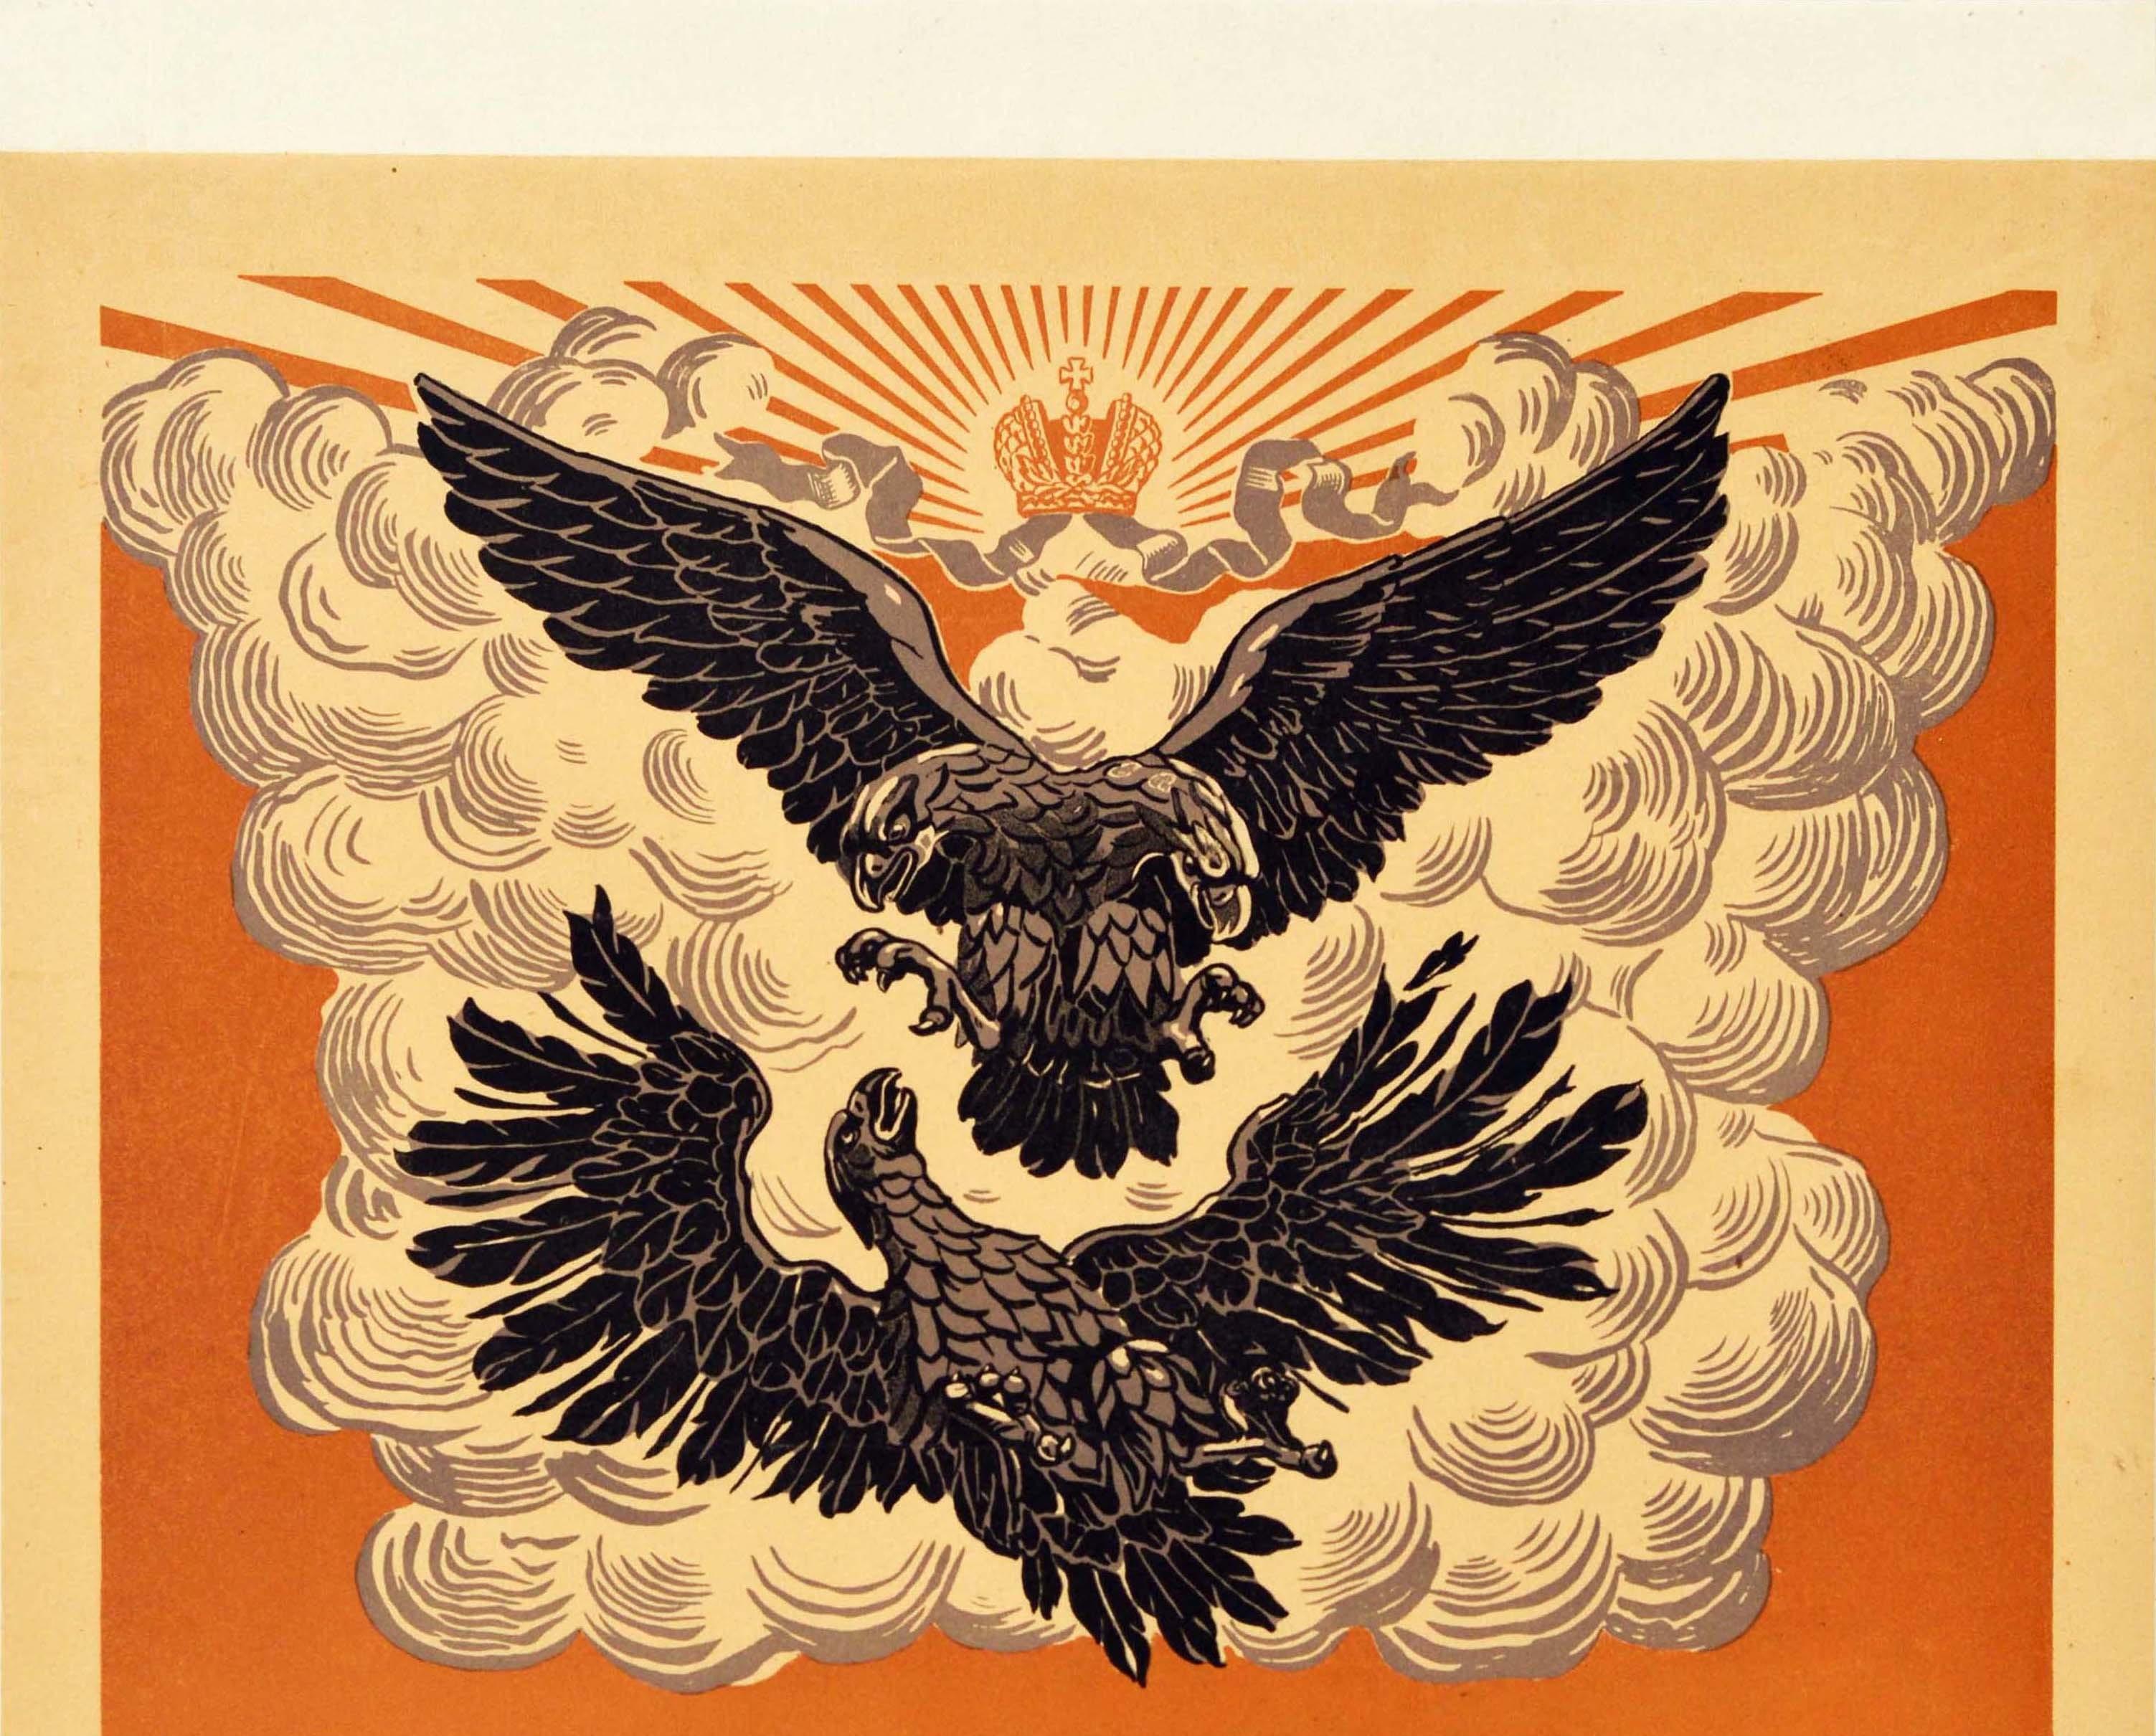 Original antique World War One war loan poster - Buy Military Loan 5½% Participation in a Loan is a Patriotic Duty of Everyone / ????????? ??????? ? ????? - ?????????????? ???? ??????? - featuring a dynamic design depicting a double headed eagle